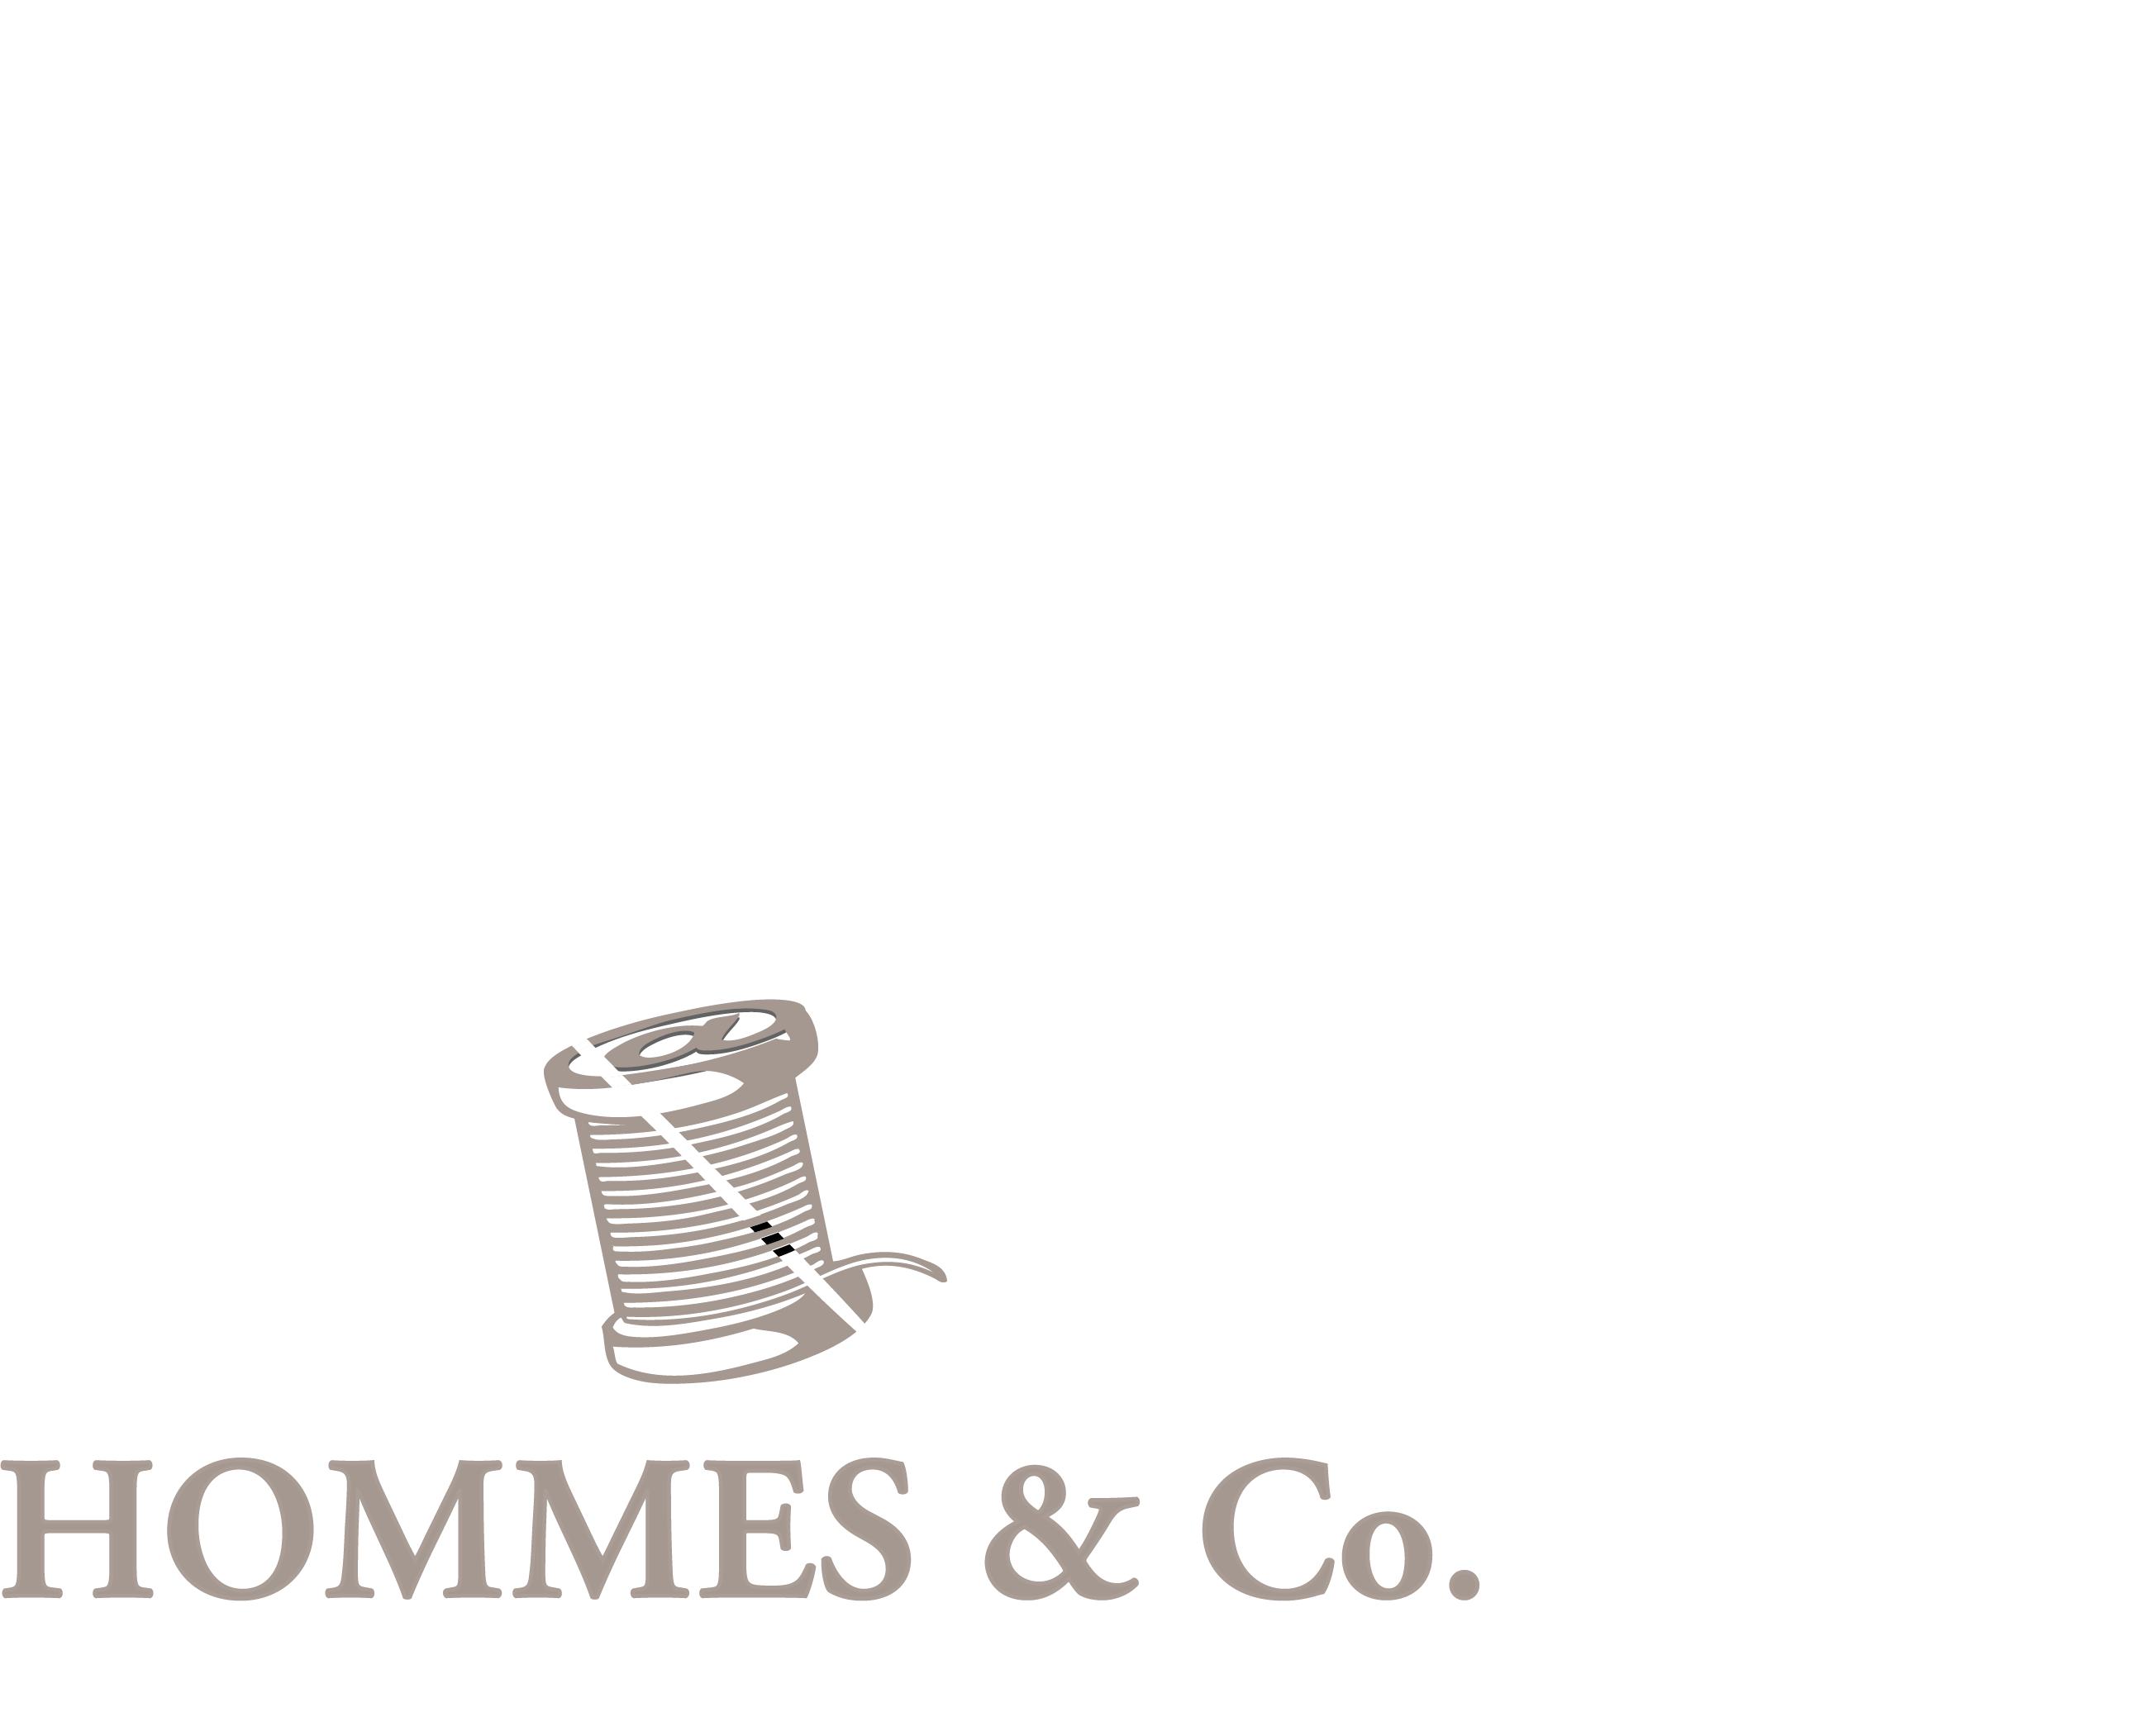 HOMMES & CO